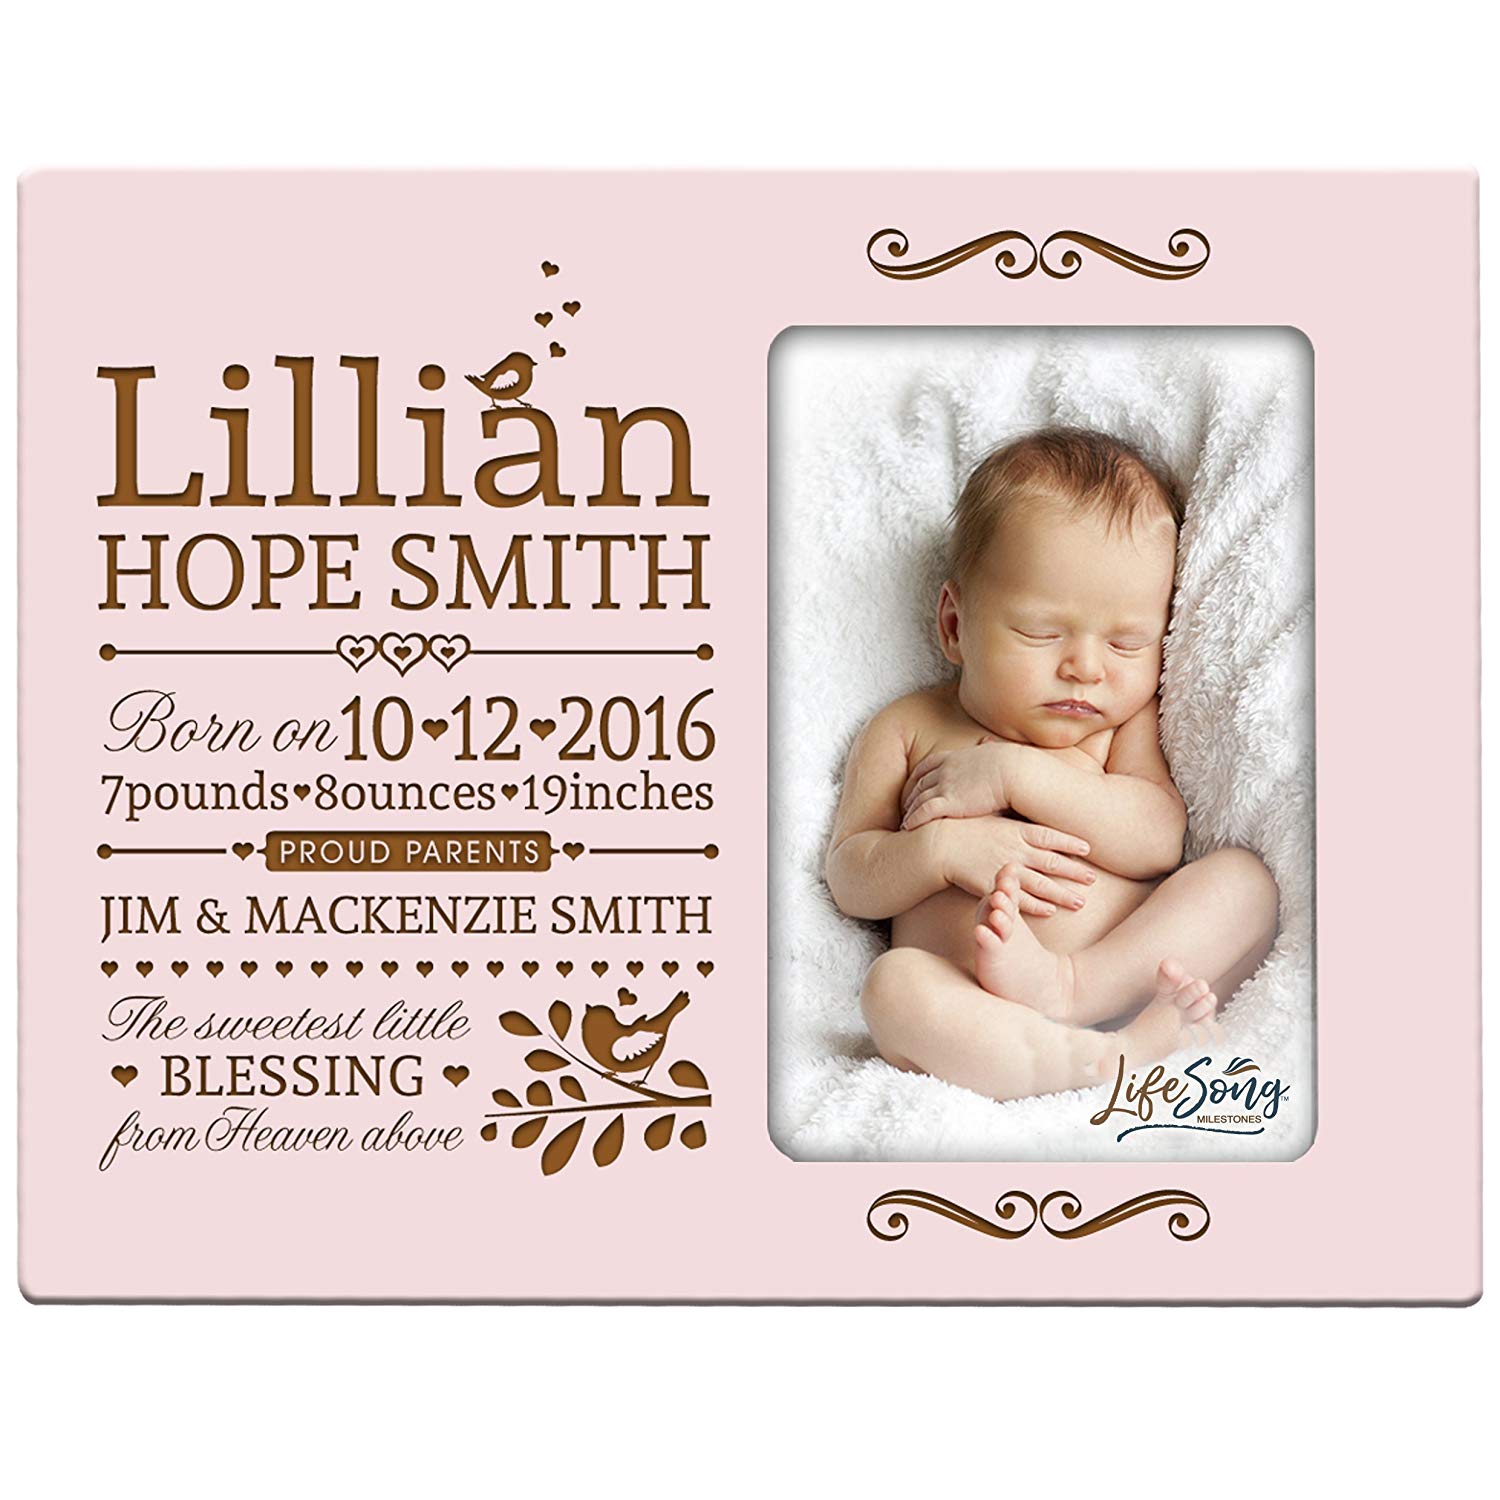 Personalized New Baby Photo Frame - The Sweetest Little Blessing - LifeSong Milestones